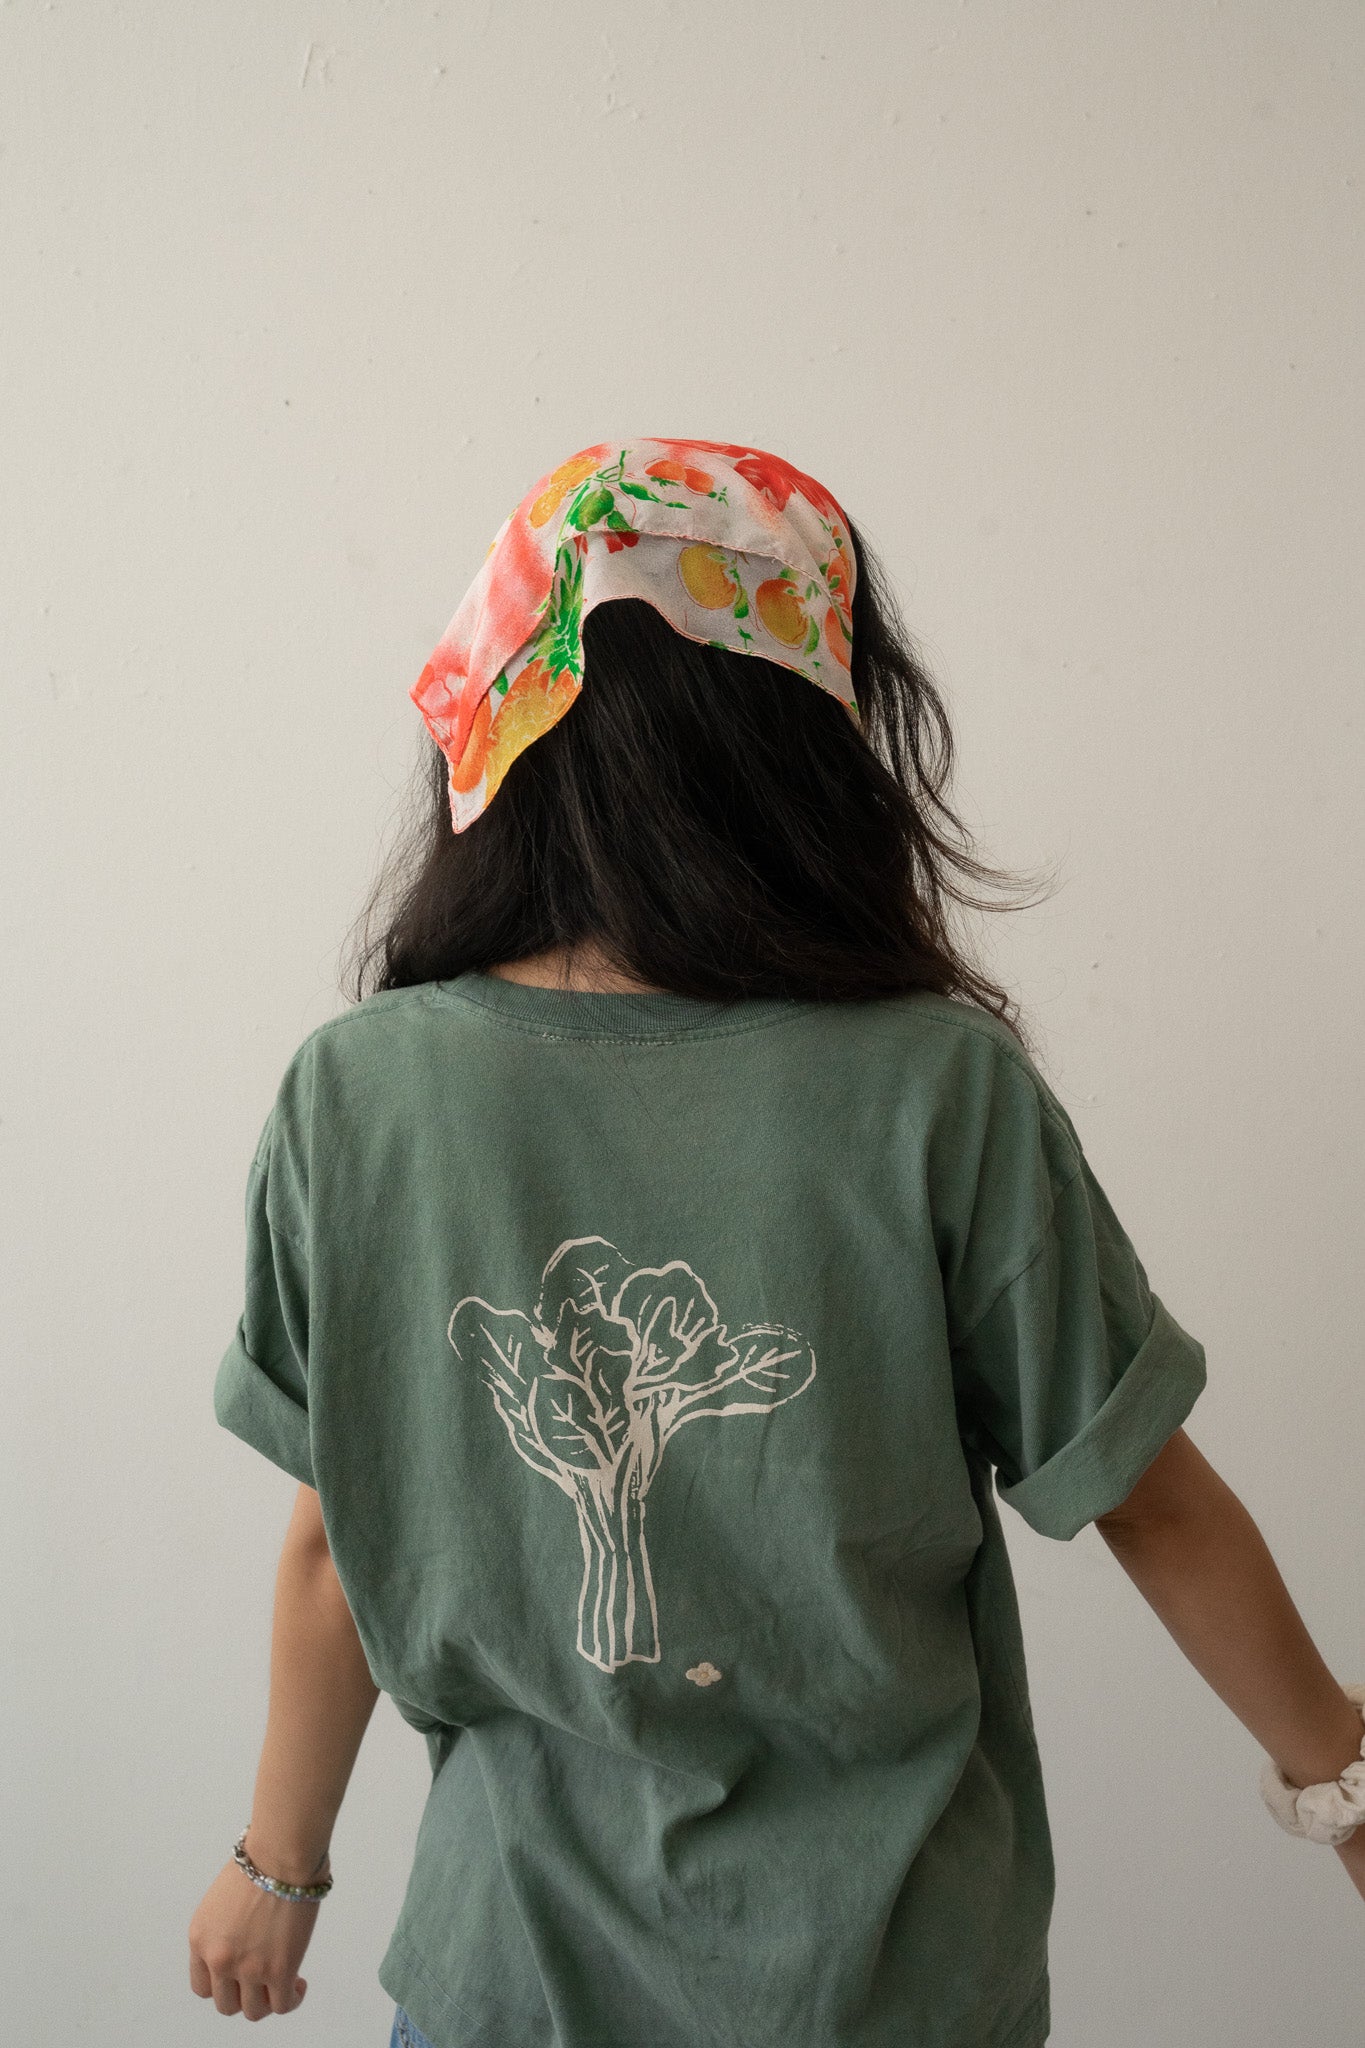 A Chinese Vietnamese woman wearing a green t-shirt with an illustration of a big Chinese broccoli and small embroidered white flower and blue jeans stands with her back to the camera. 